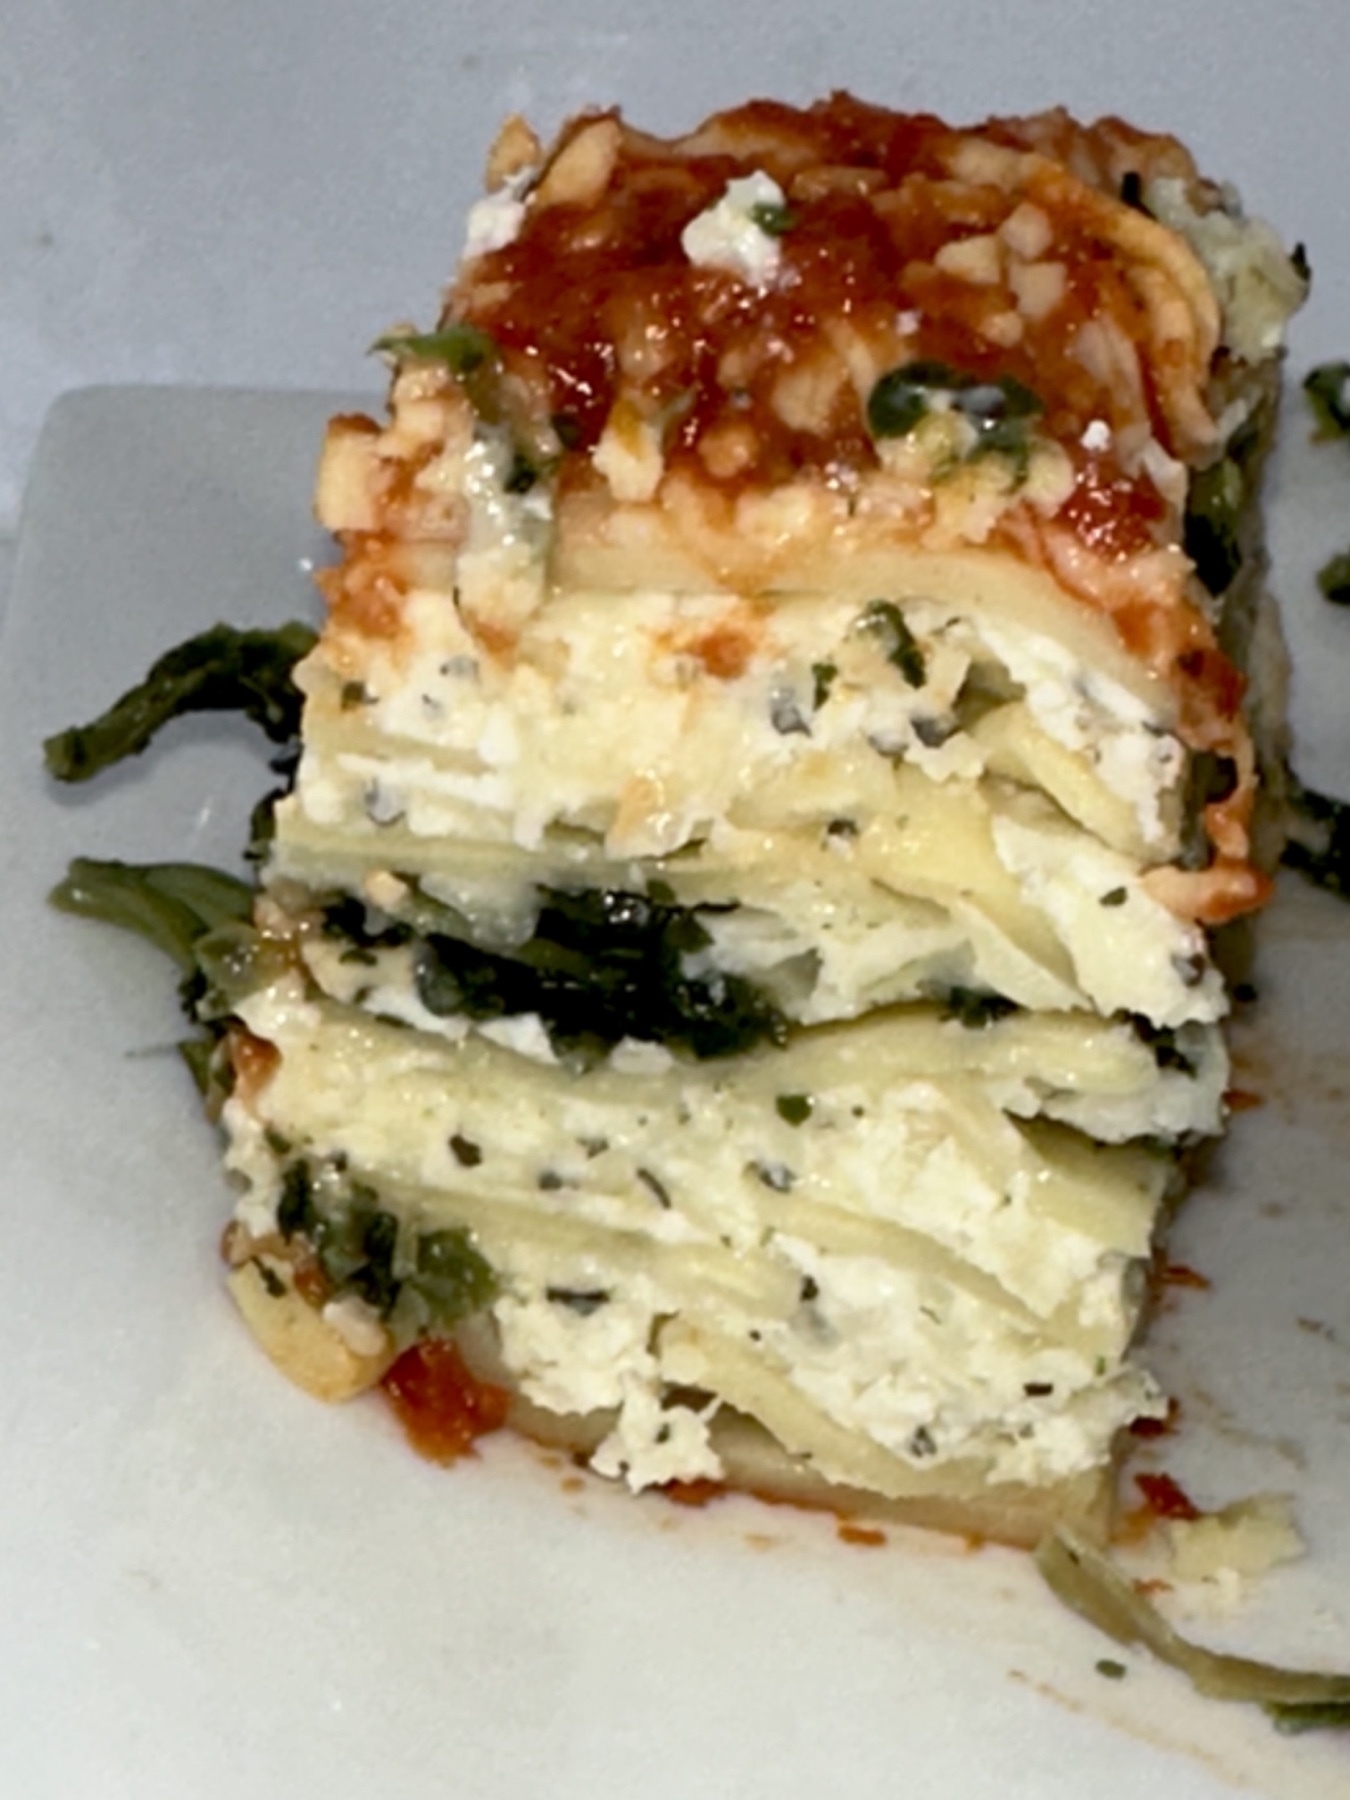 Cross-section of a lasagna slice (photo)